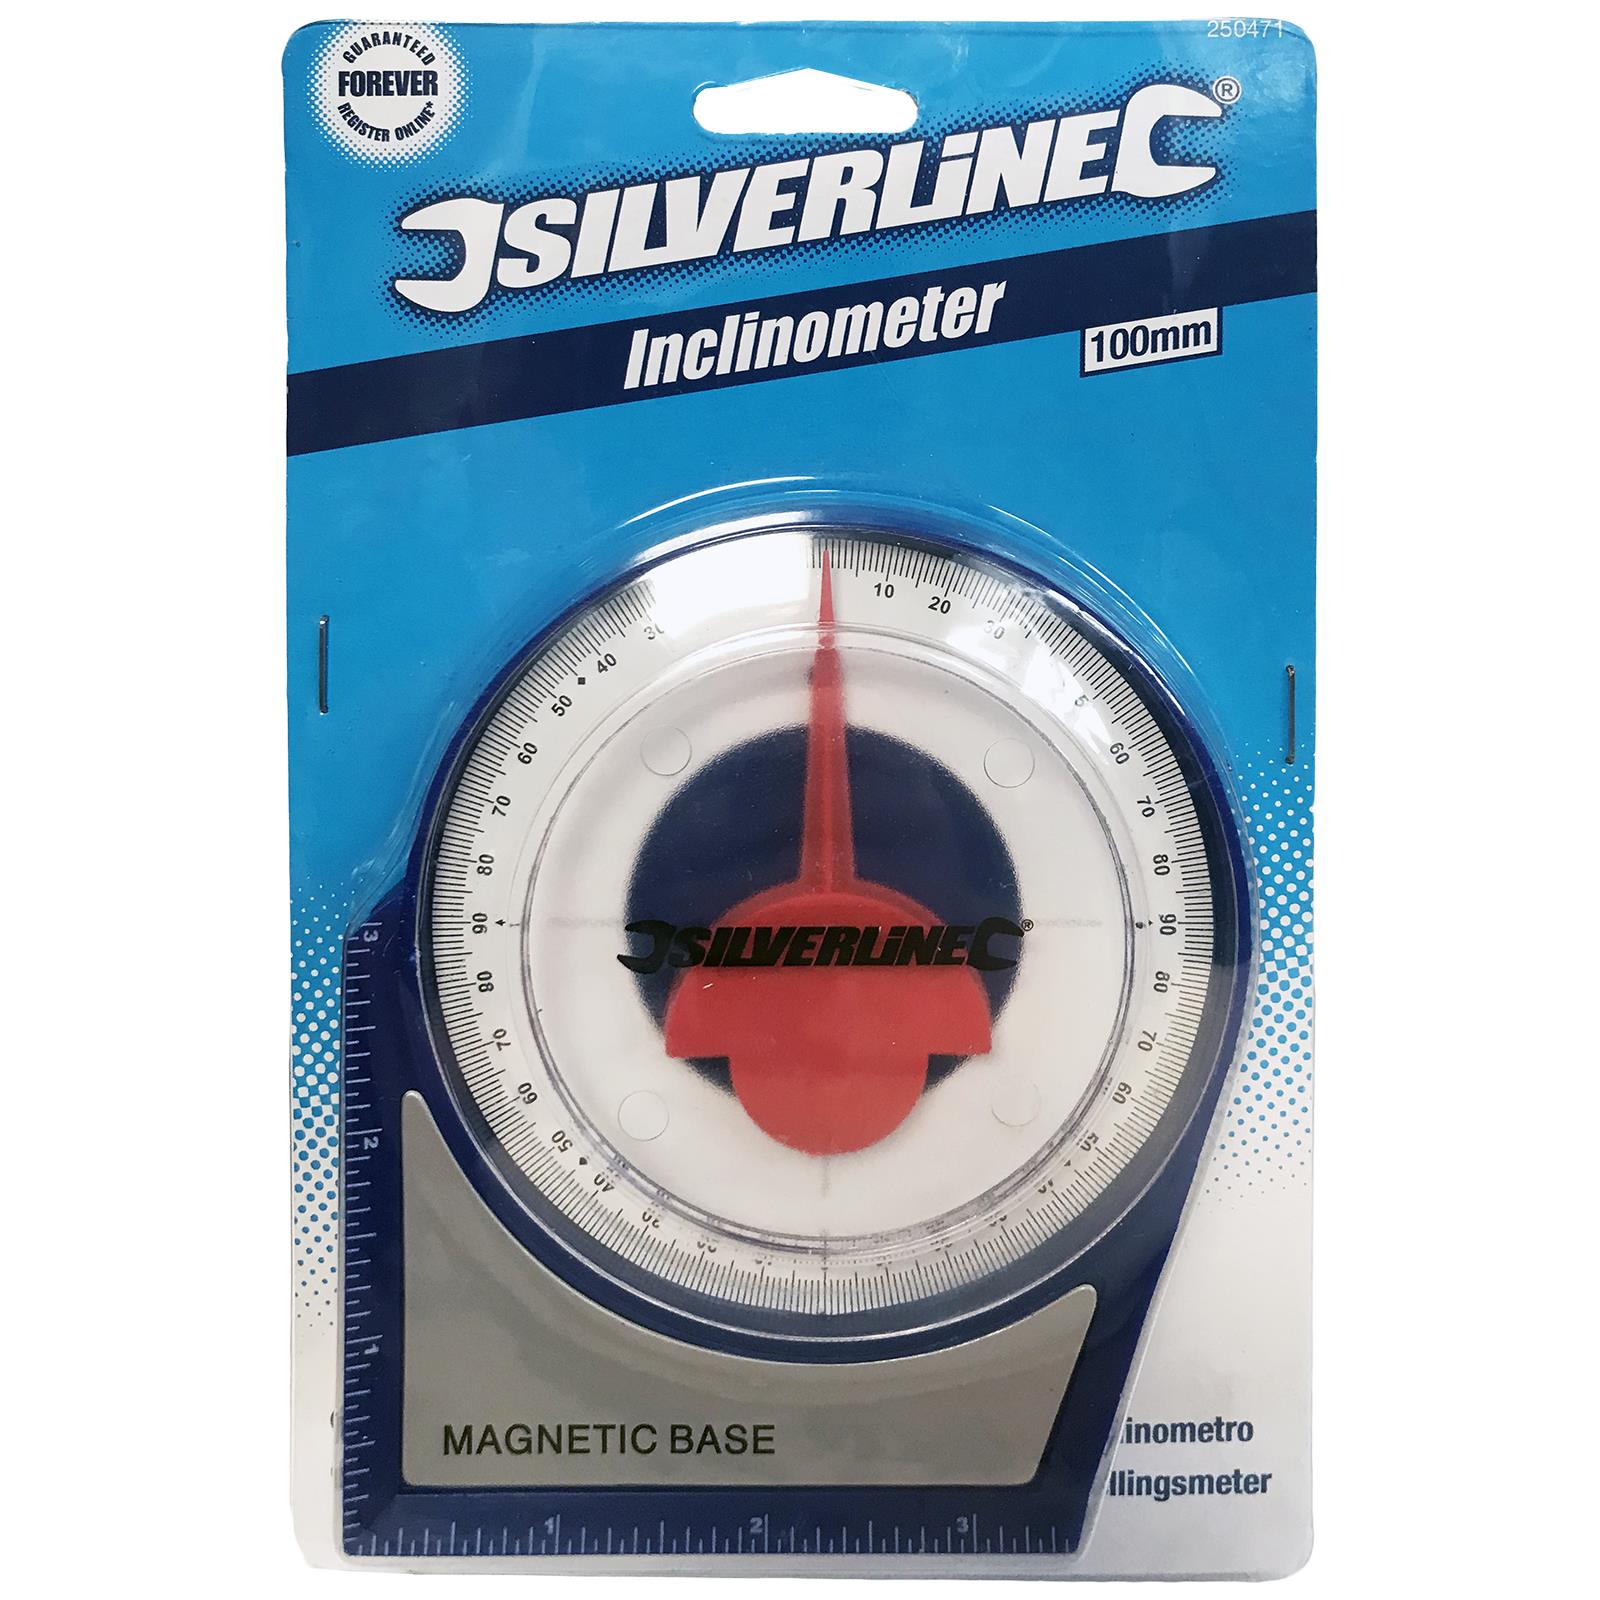 Silverline Inclinometer Roofing Scaffolding 100mm Angle Measurement Level Gauge